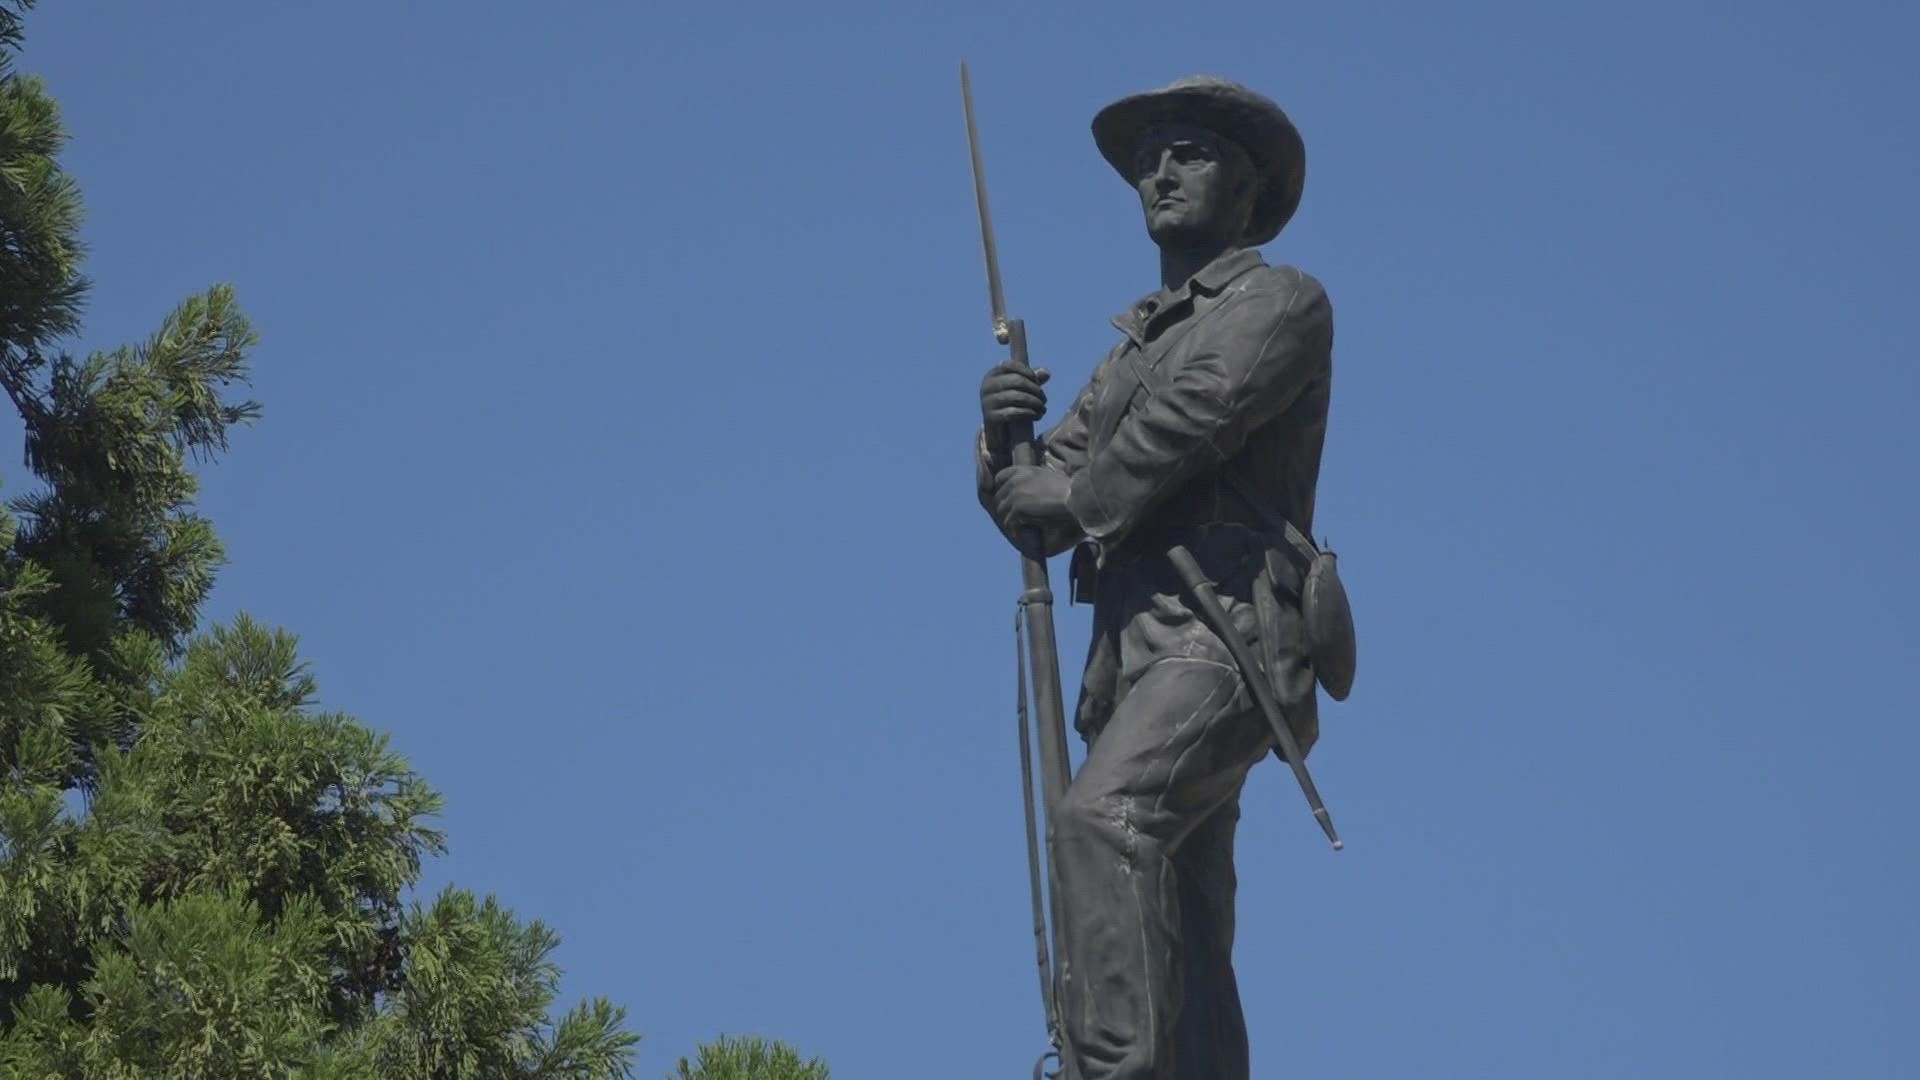 Asheboro City Council passed a resolution supporting a plan to move a confederate statue. But only Randolph County can decide what to do with it.